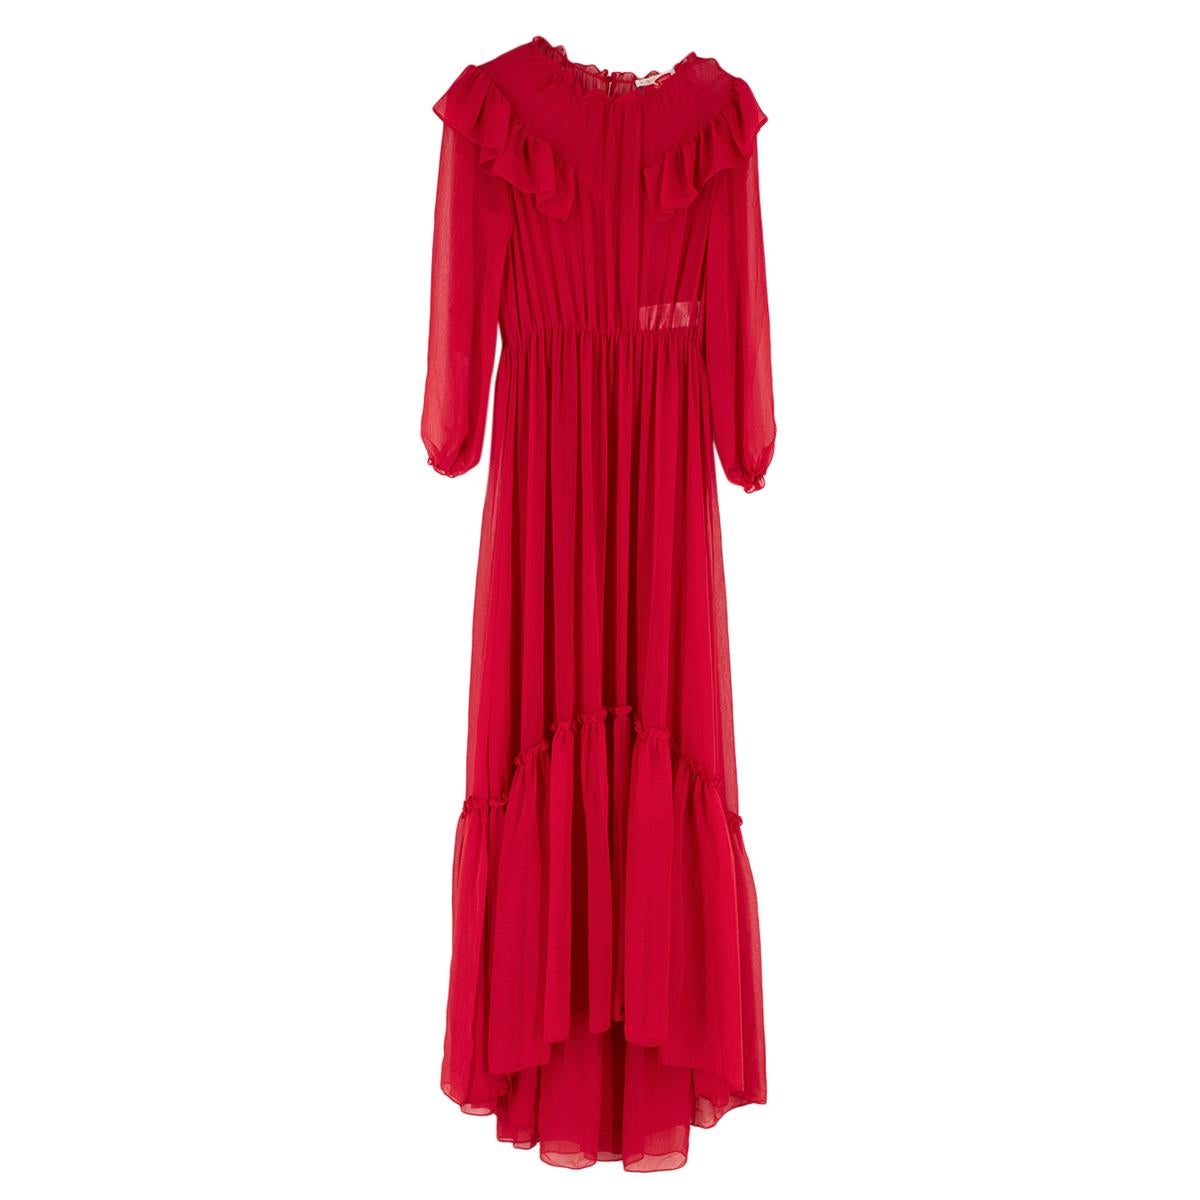 Maje Red Long Muslin Dress with Ruffles 

Come through in blazing color wearing this romantically ruffled maxi that's ready to be styled up or down however you like.

- Back keyhole with button-and-loop closure
- High neck
- Long sleeves with